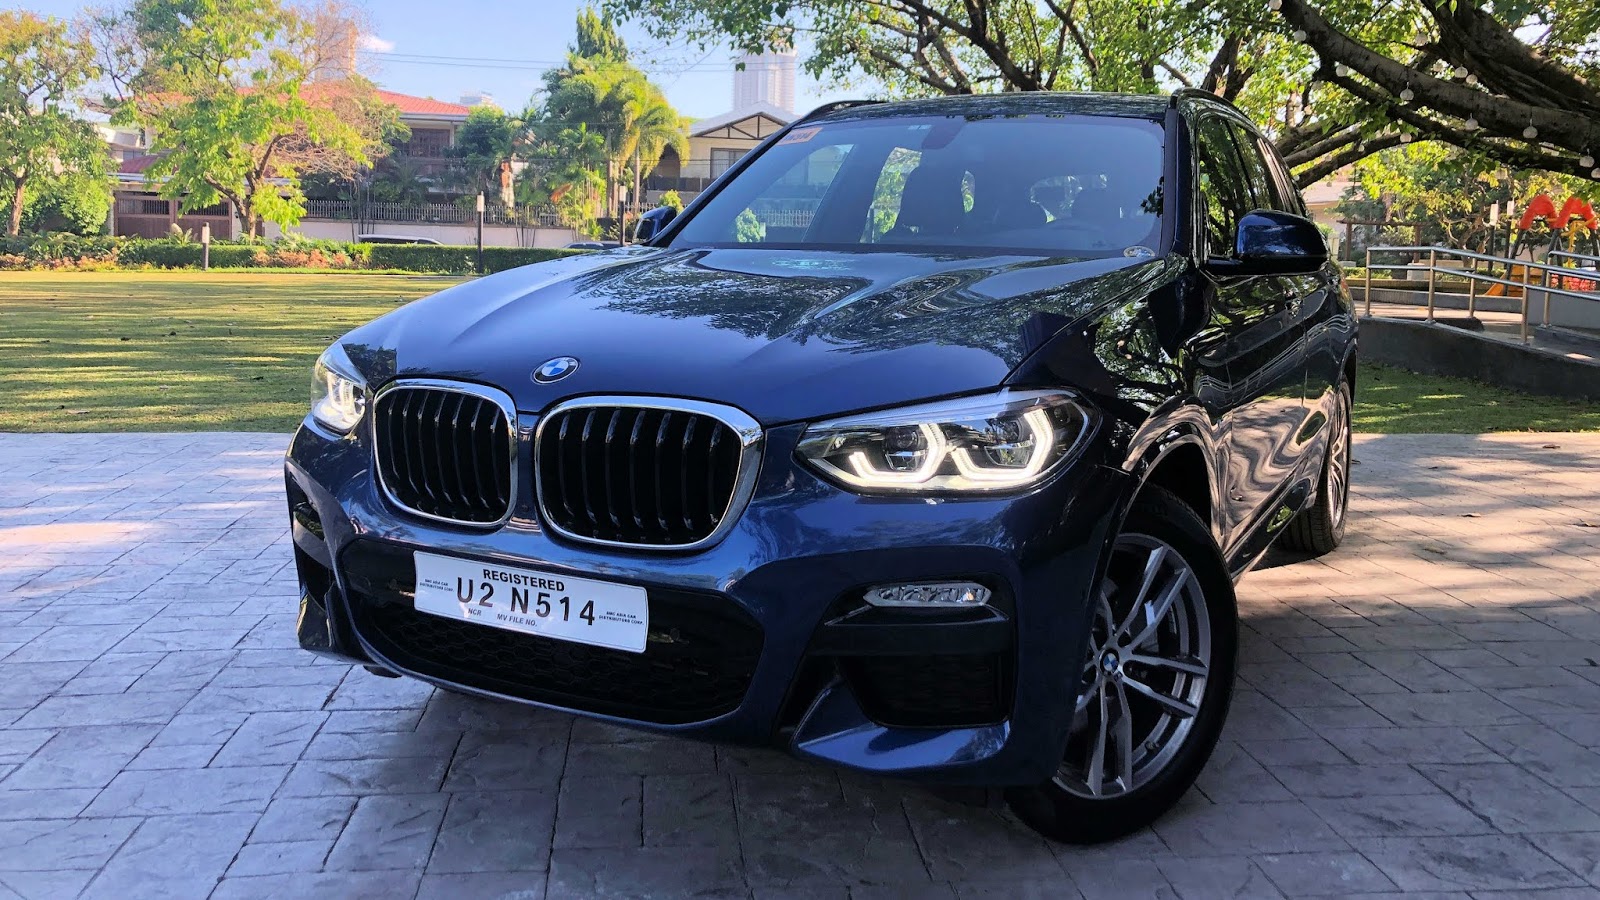 The Bmw X3 Lives Up To What Every Independent Mobile Upscale Filipina Wants Carguide Ph Philippine Car News Car Reviews Car Prices